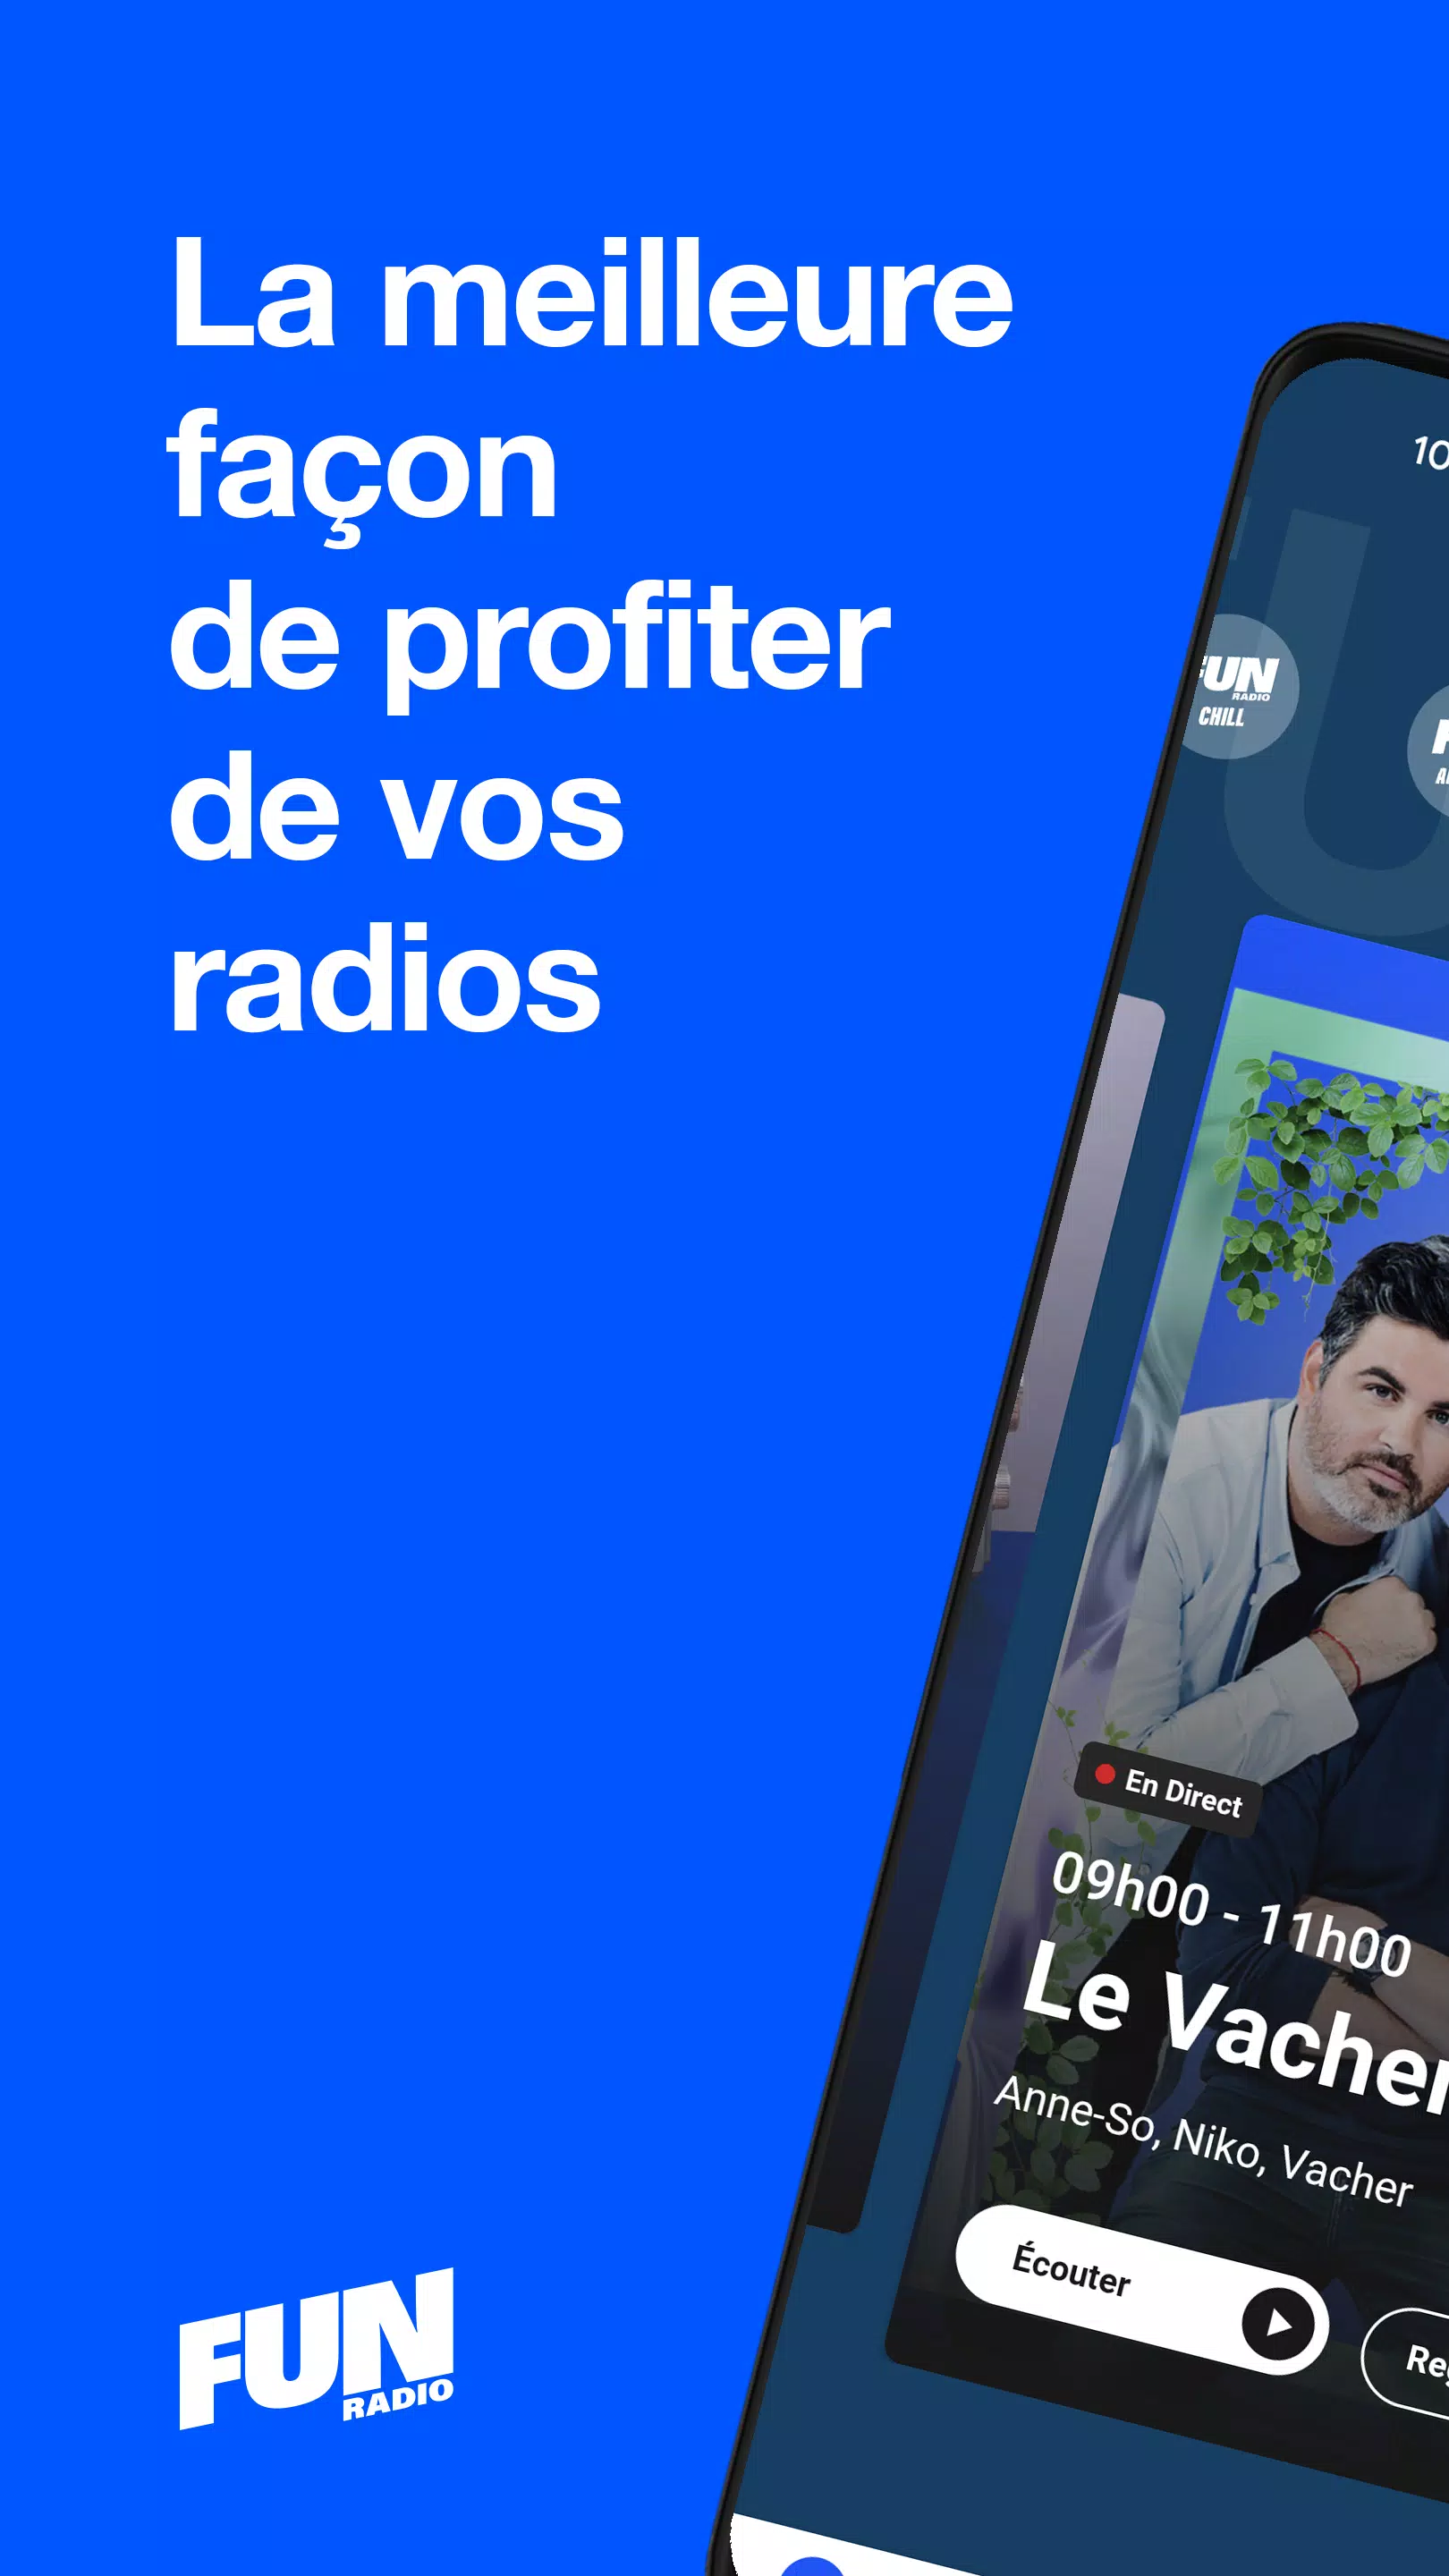 Fun Radio for Android - APK Download